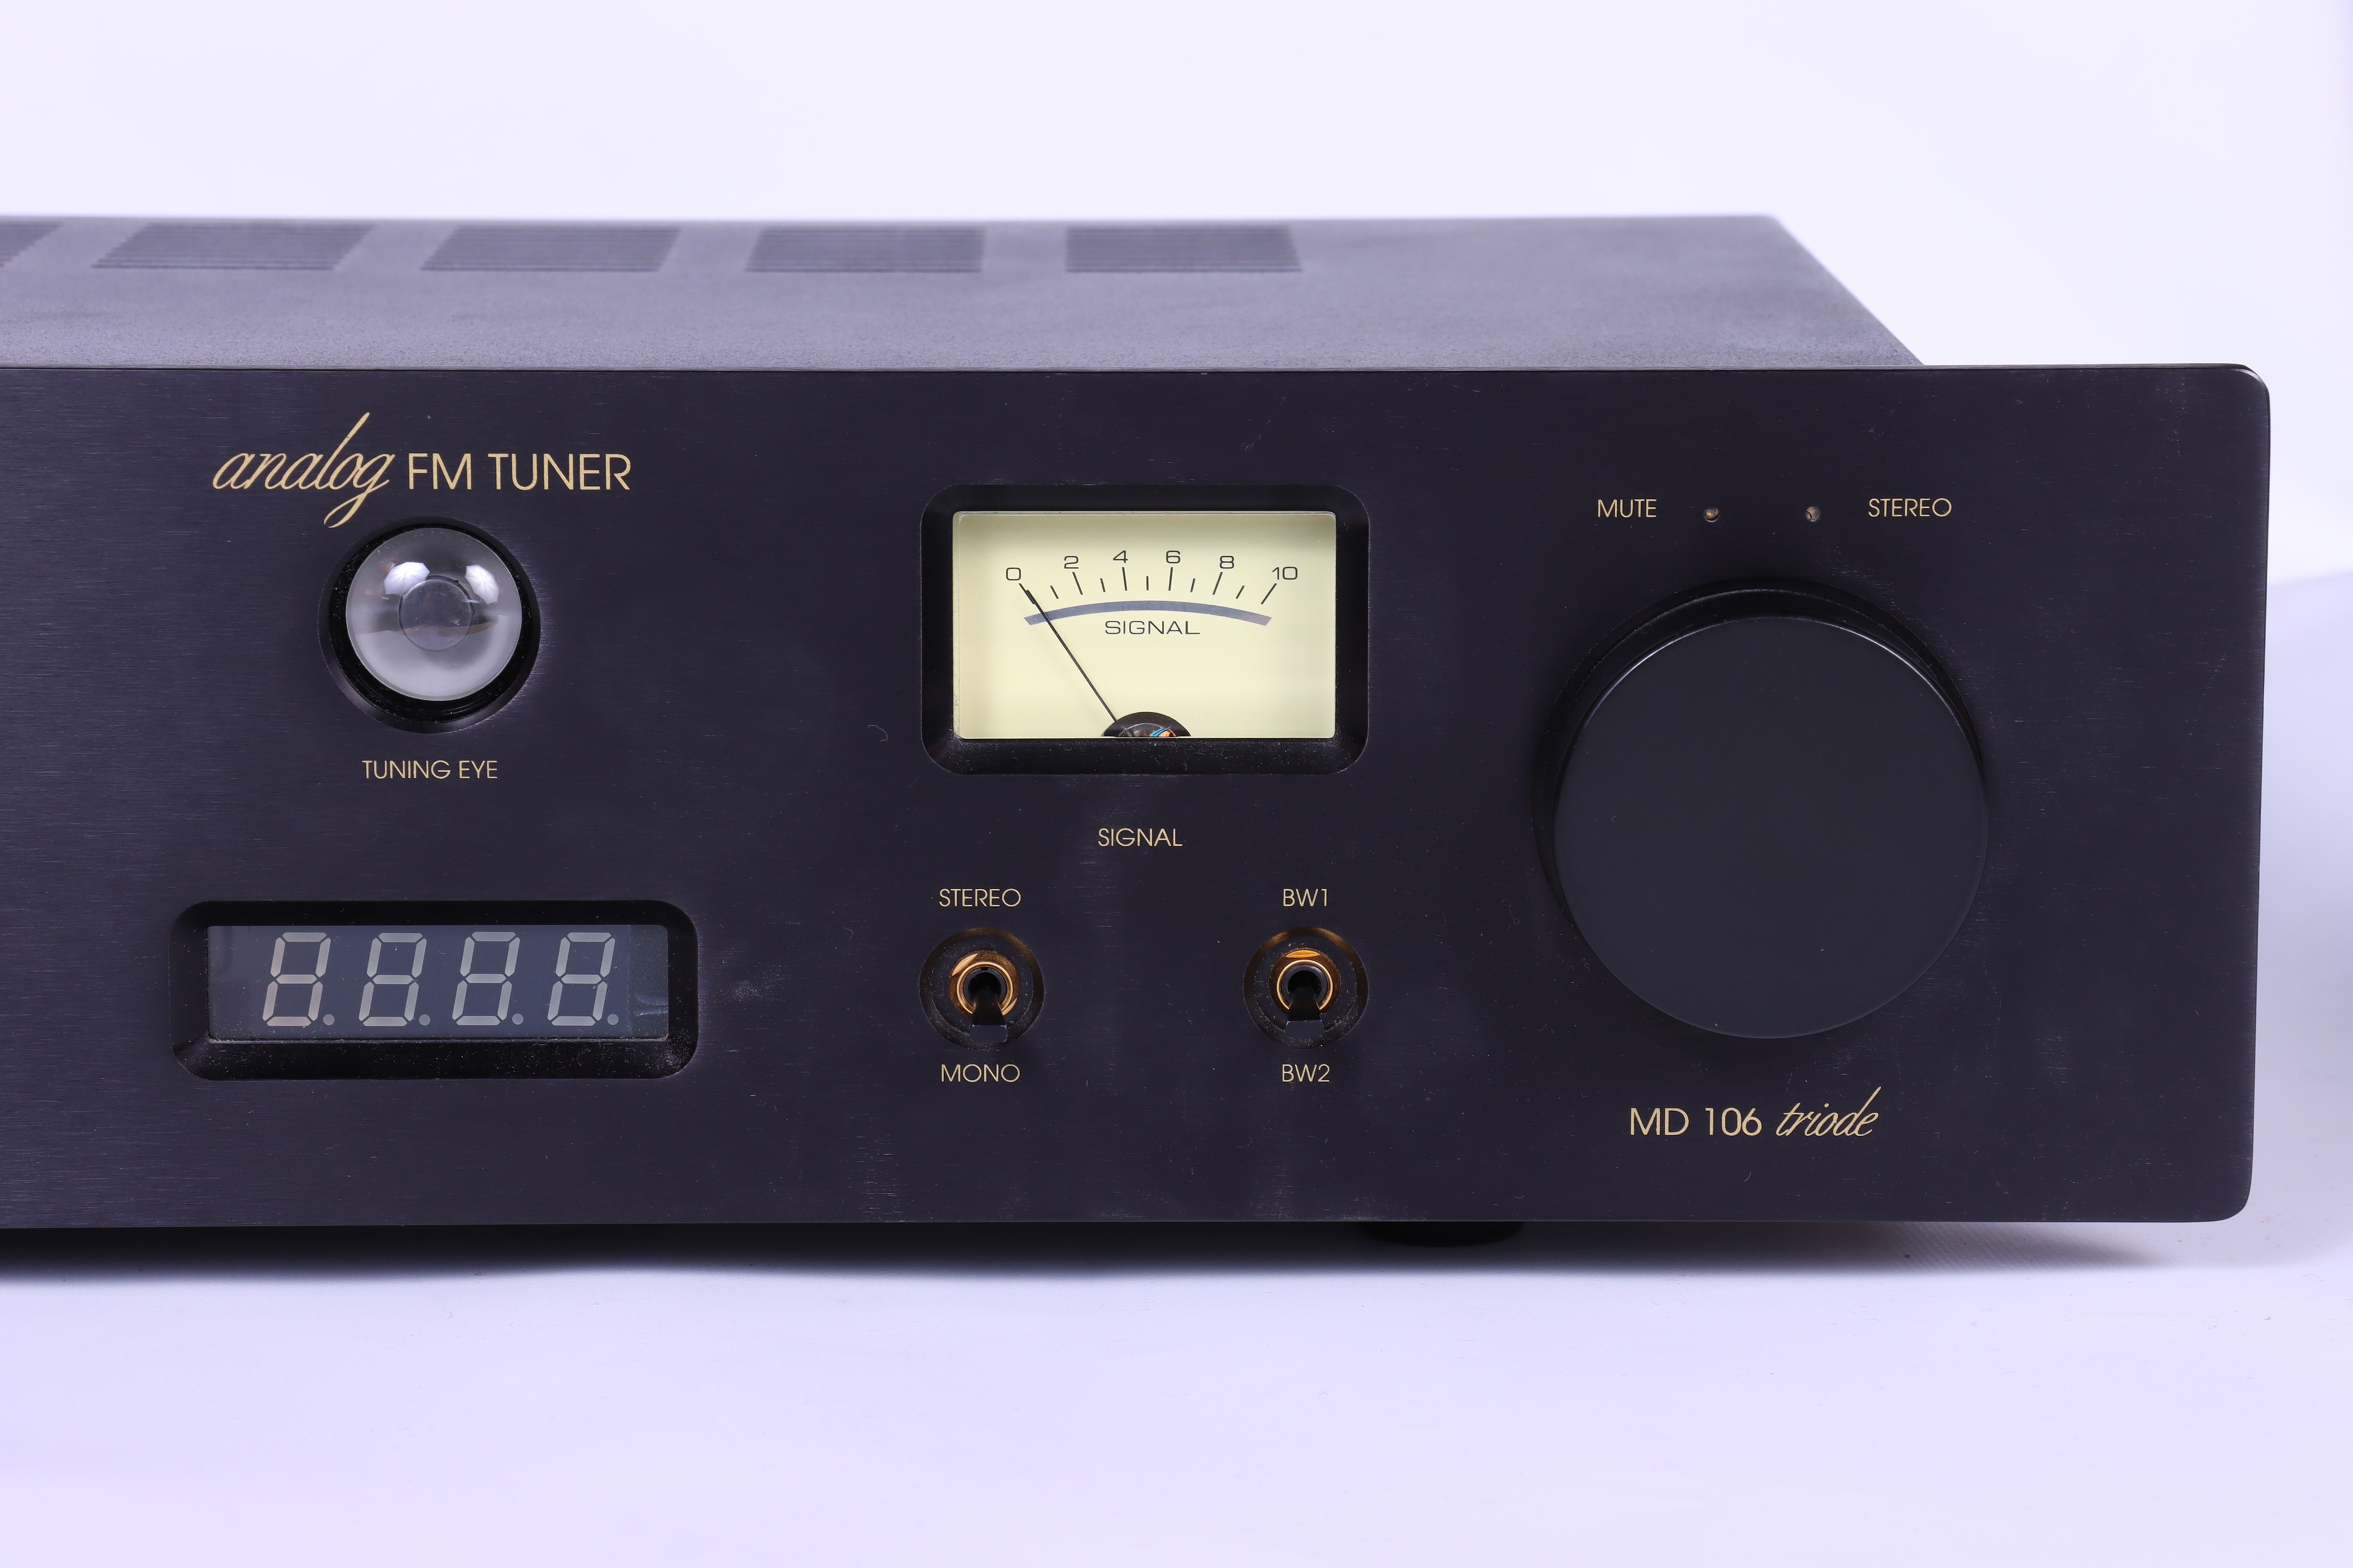 A Magnum Dynalab MD 106 Triode Analog FM Tuner, - Image 3 of 5